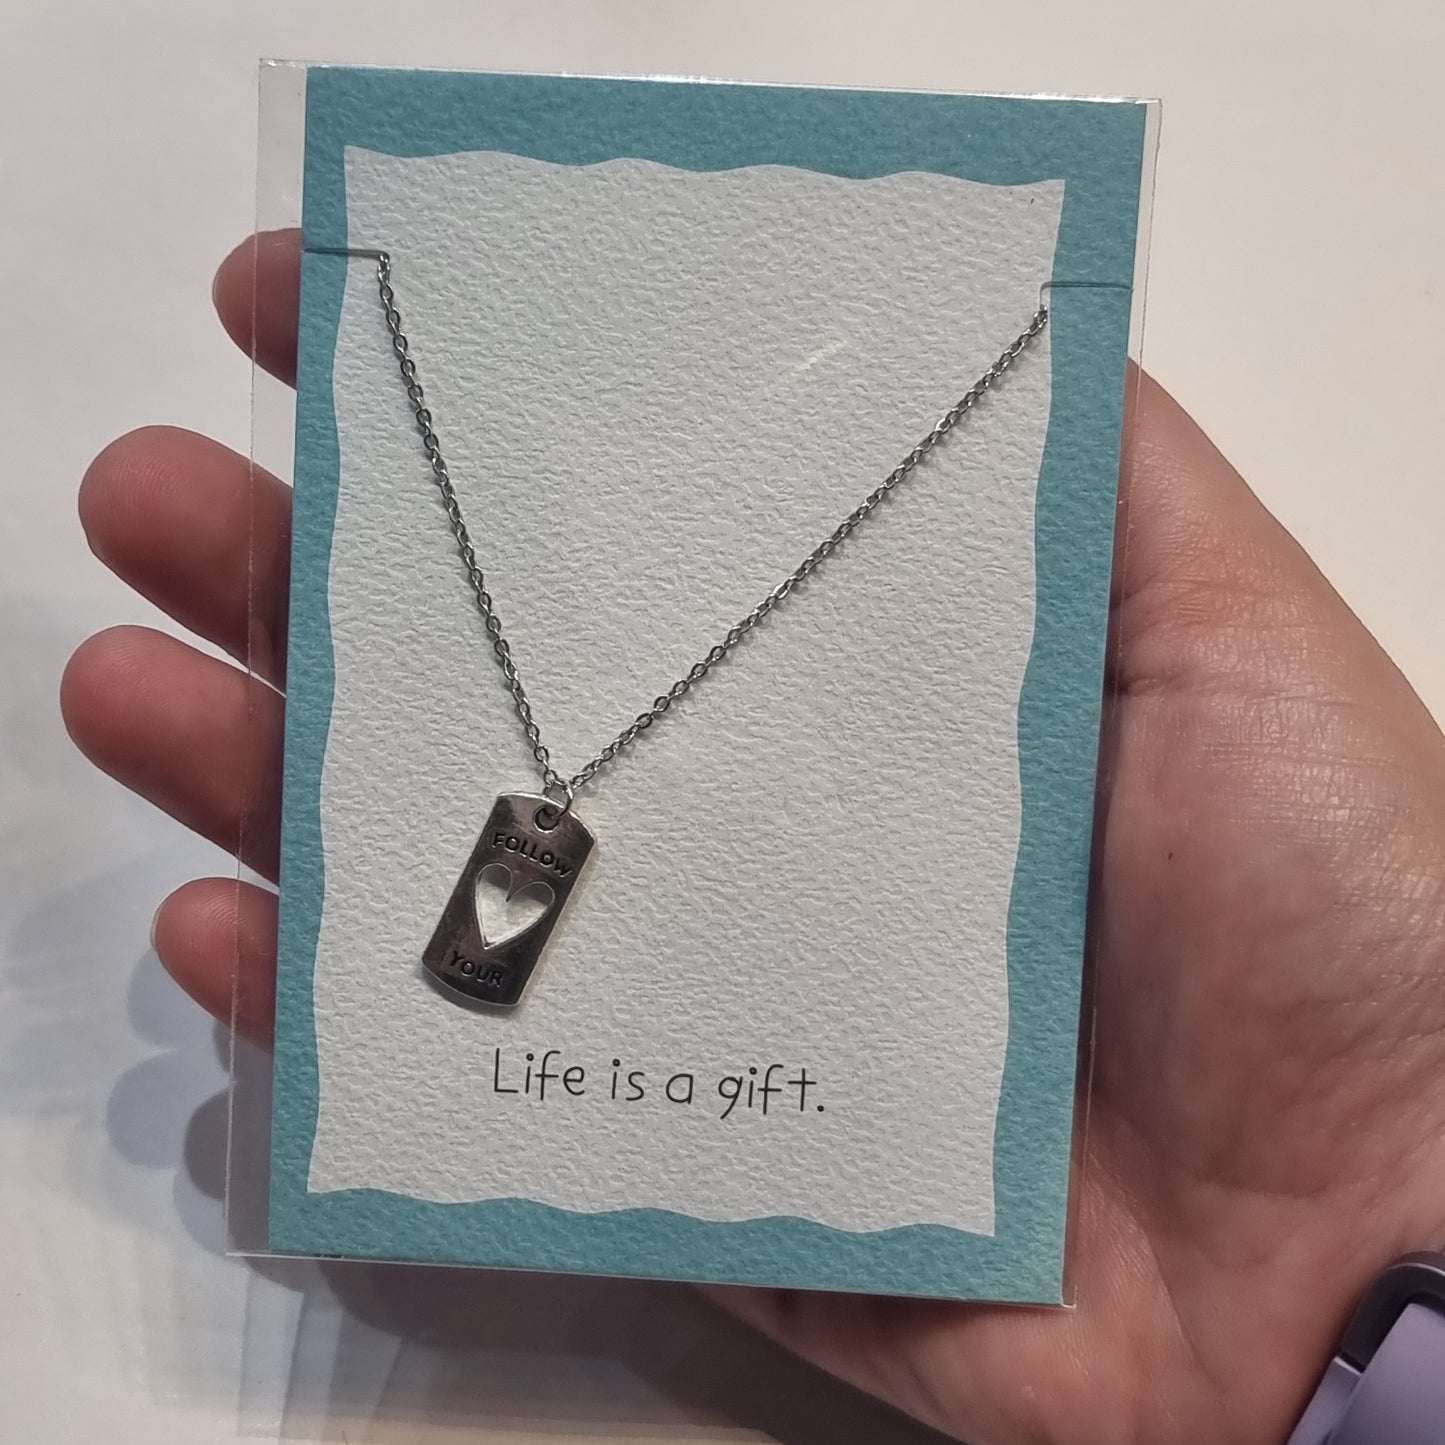 Life is a gift pendant - Rivendell Shop